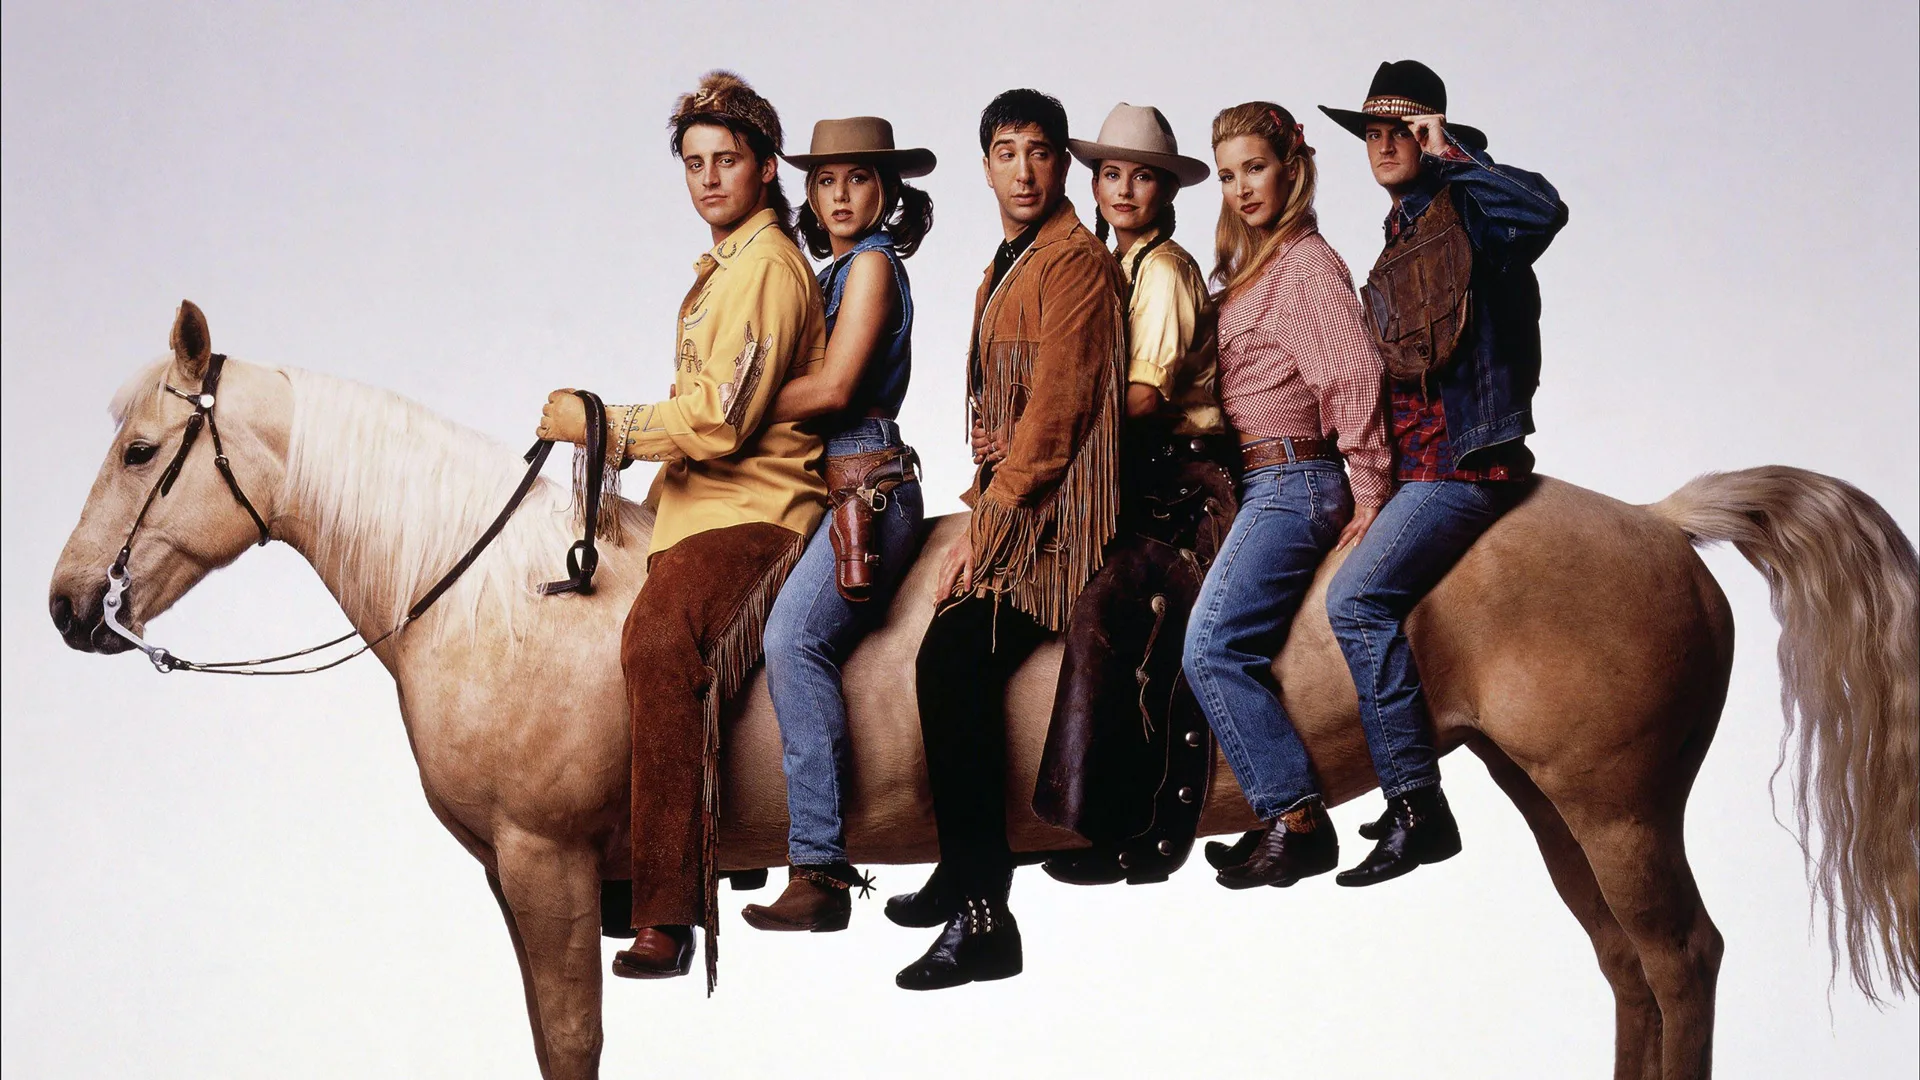 A photo of the cast of the TV show Friends sat on an unusually elongated horse which has been photoshopped - they are wearing western clothing all against a grey background